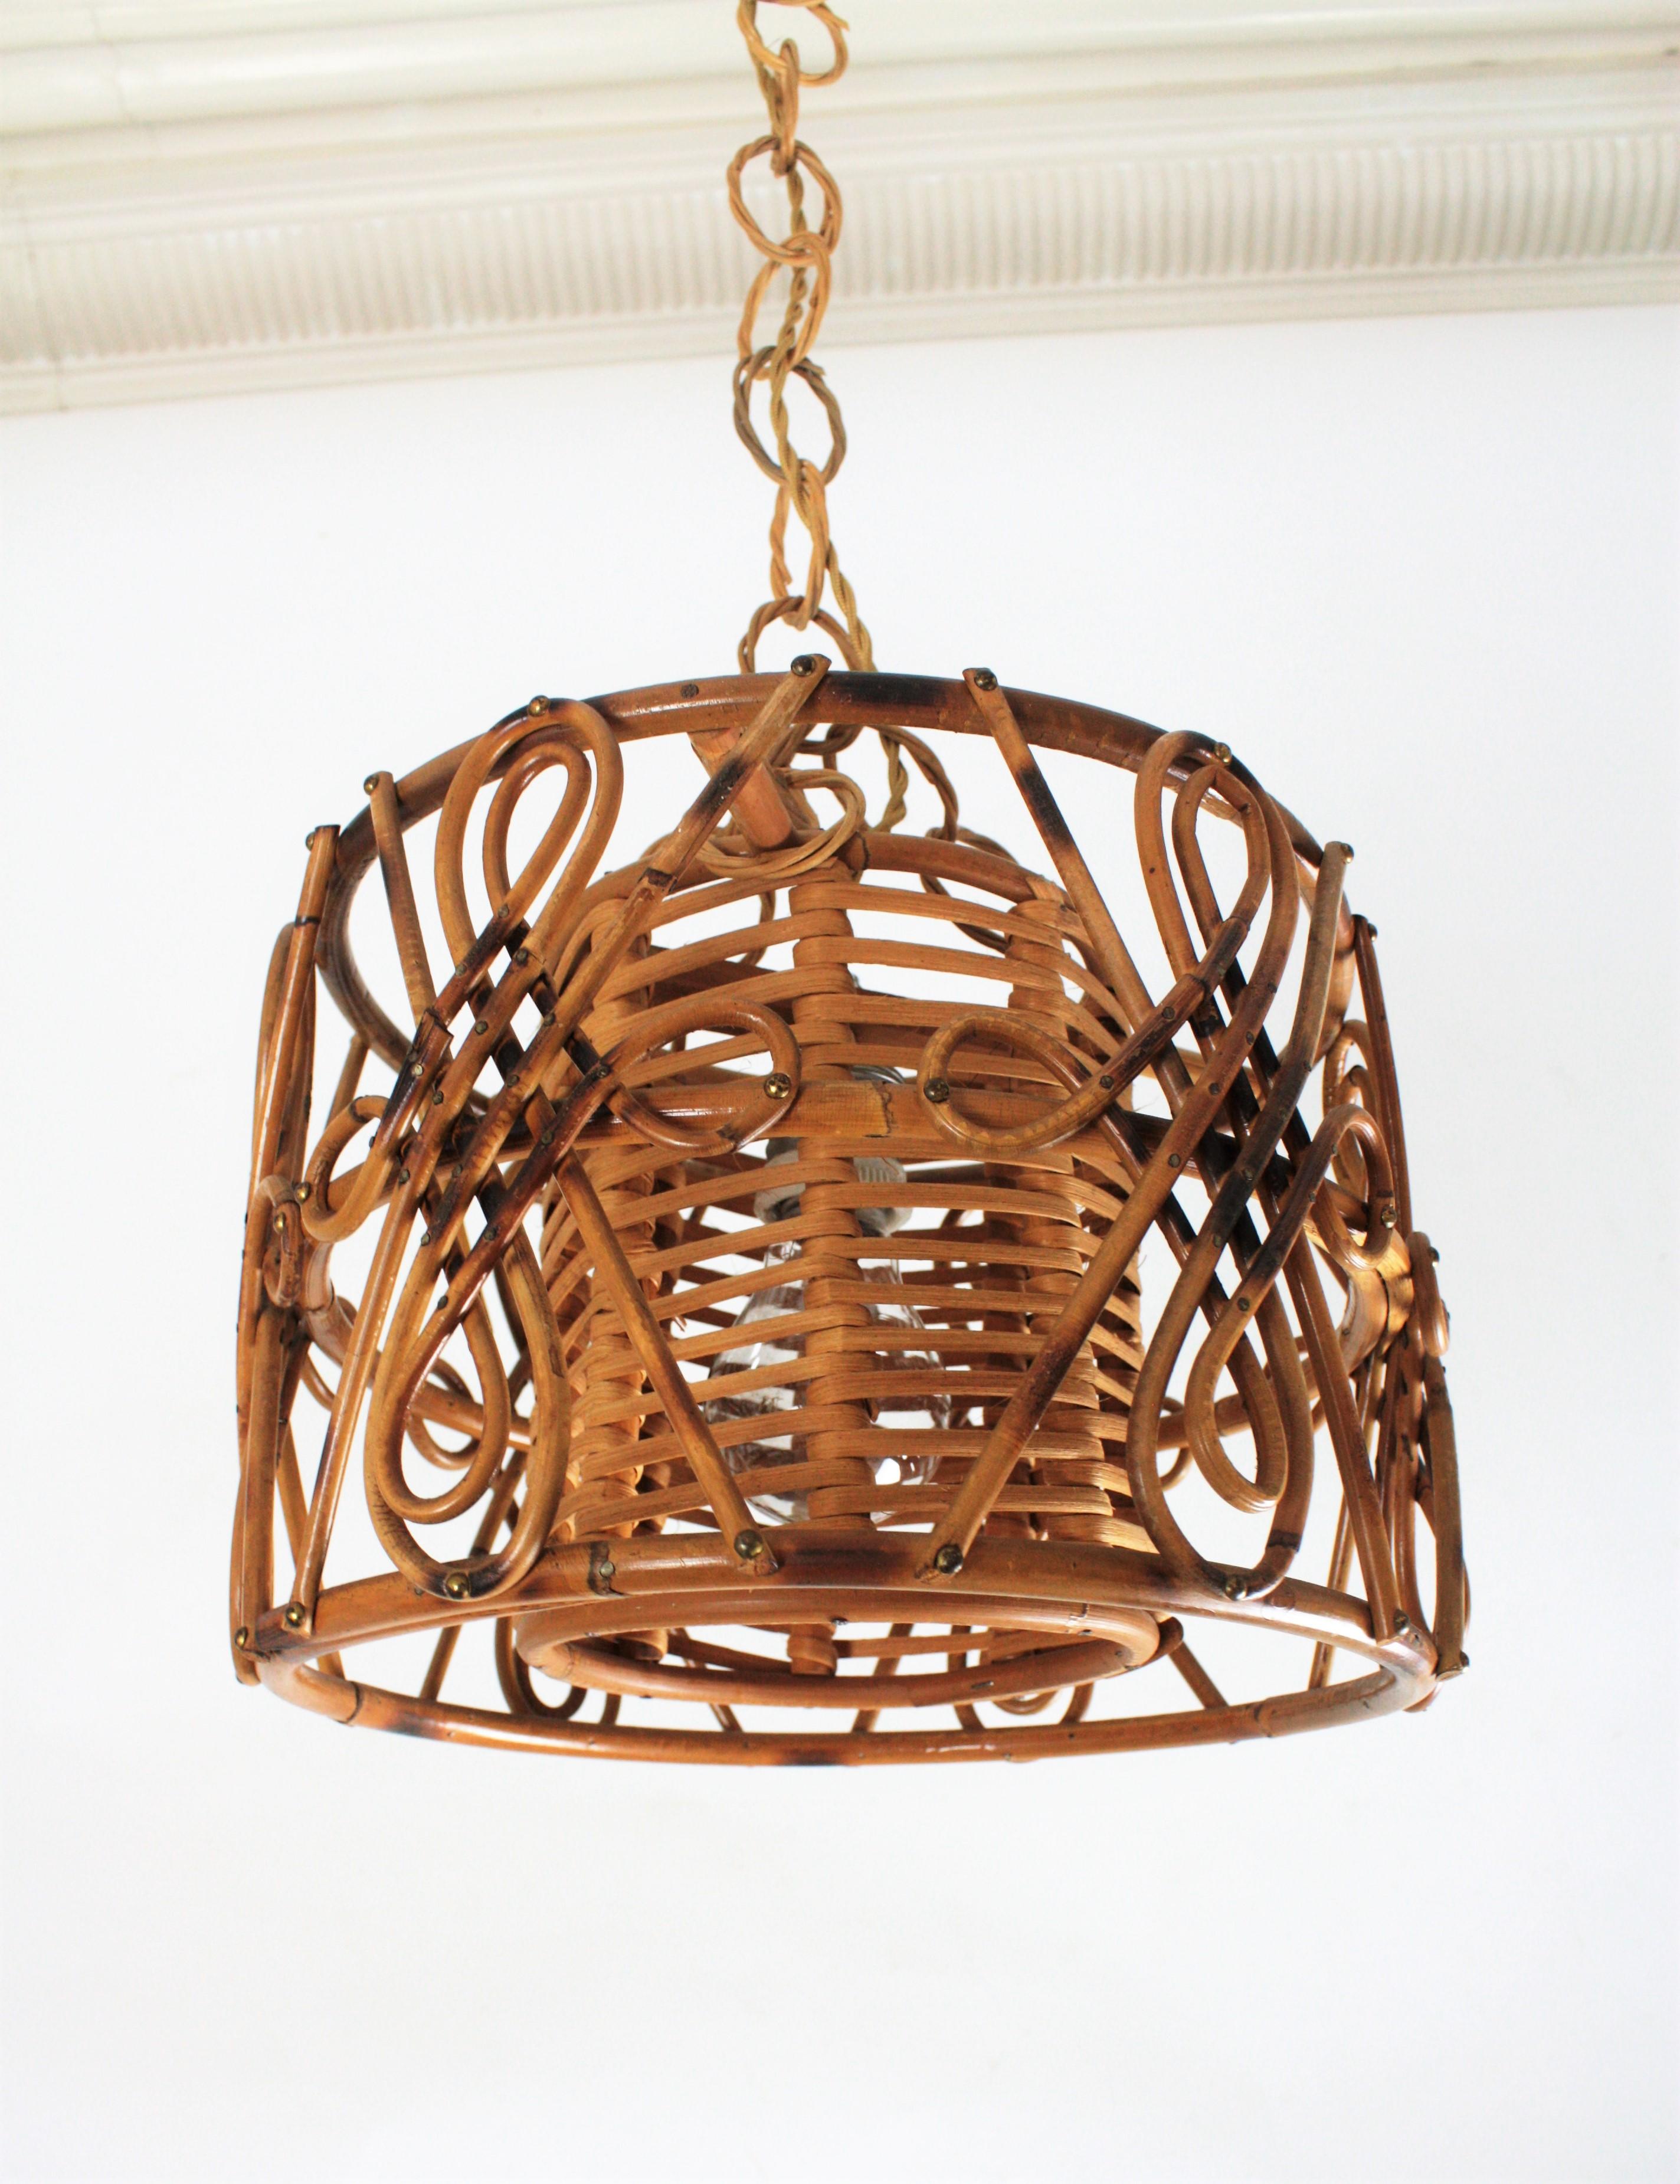 20th Century Rattan Drum Form Pendant Hanging Light with Chinoiserie Accents, France, 1950s